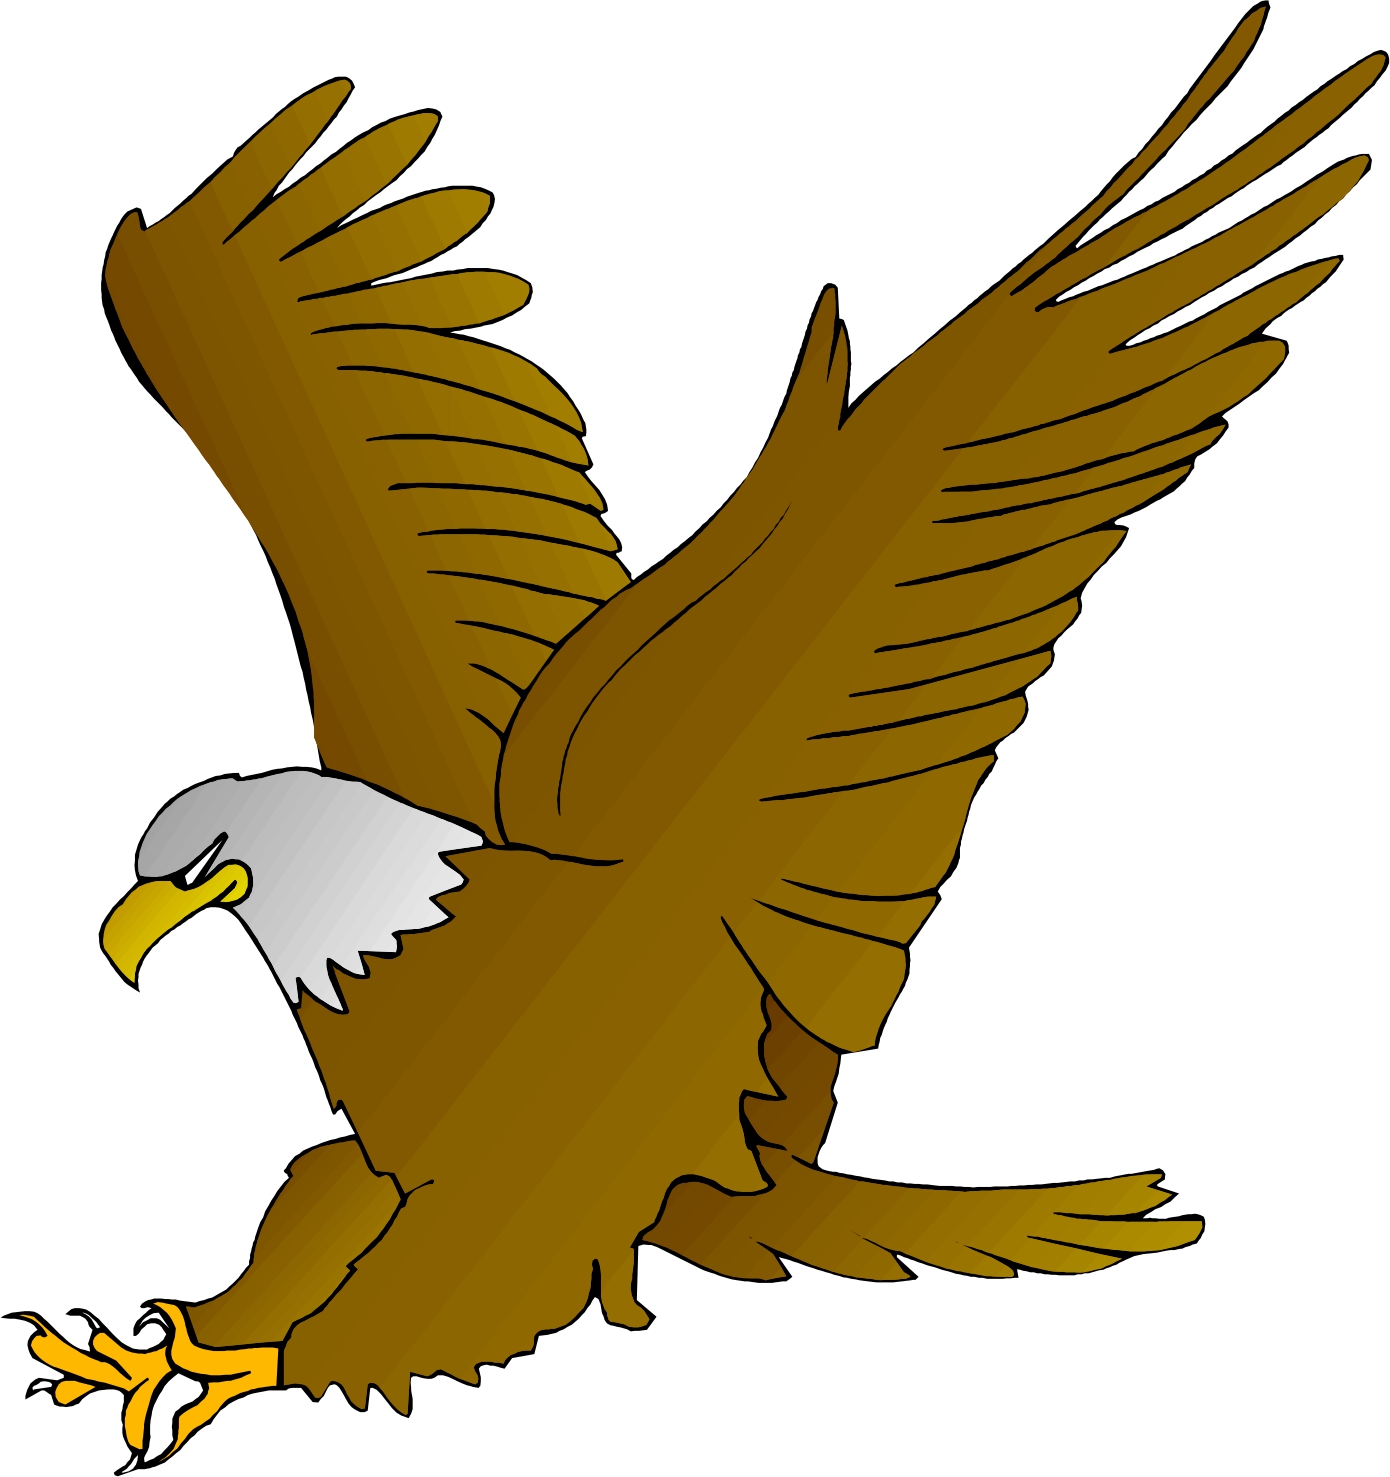 Flying eagle clip art image 4 - Cliparting.com